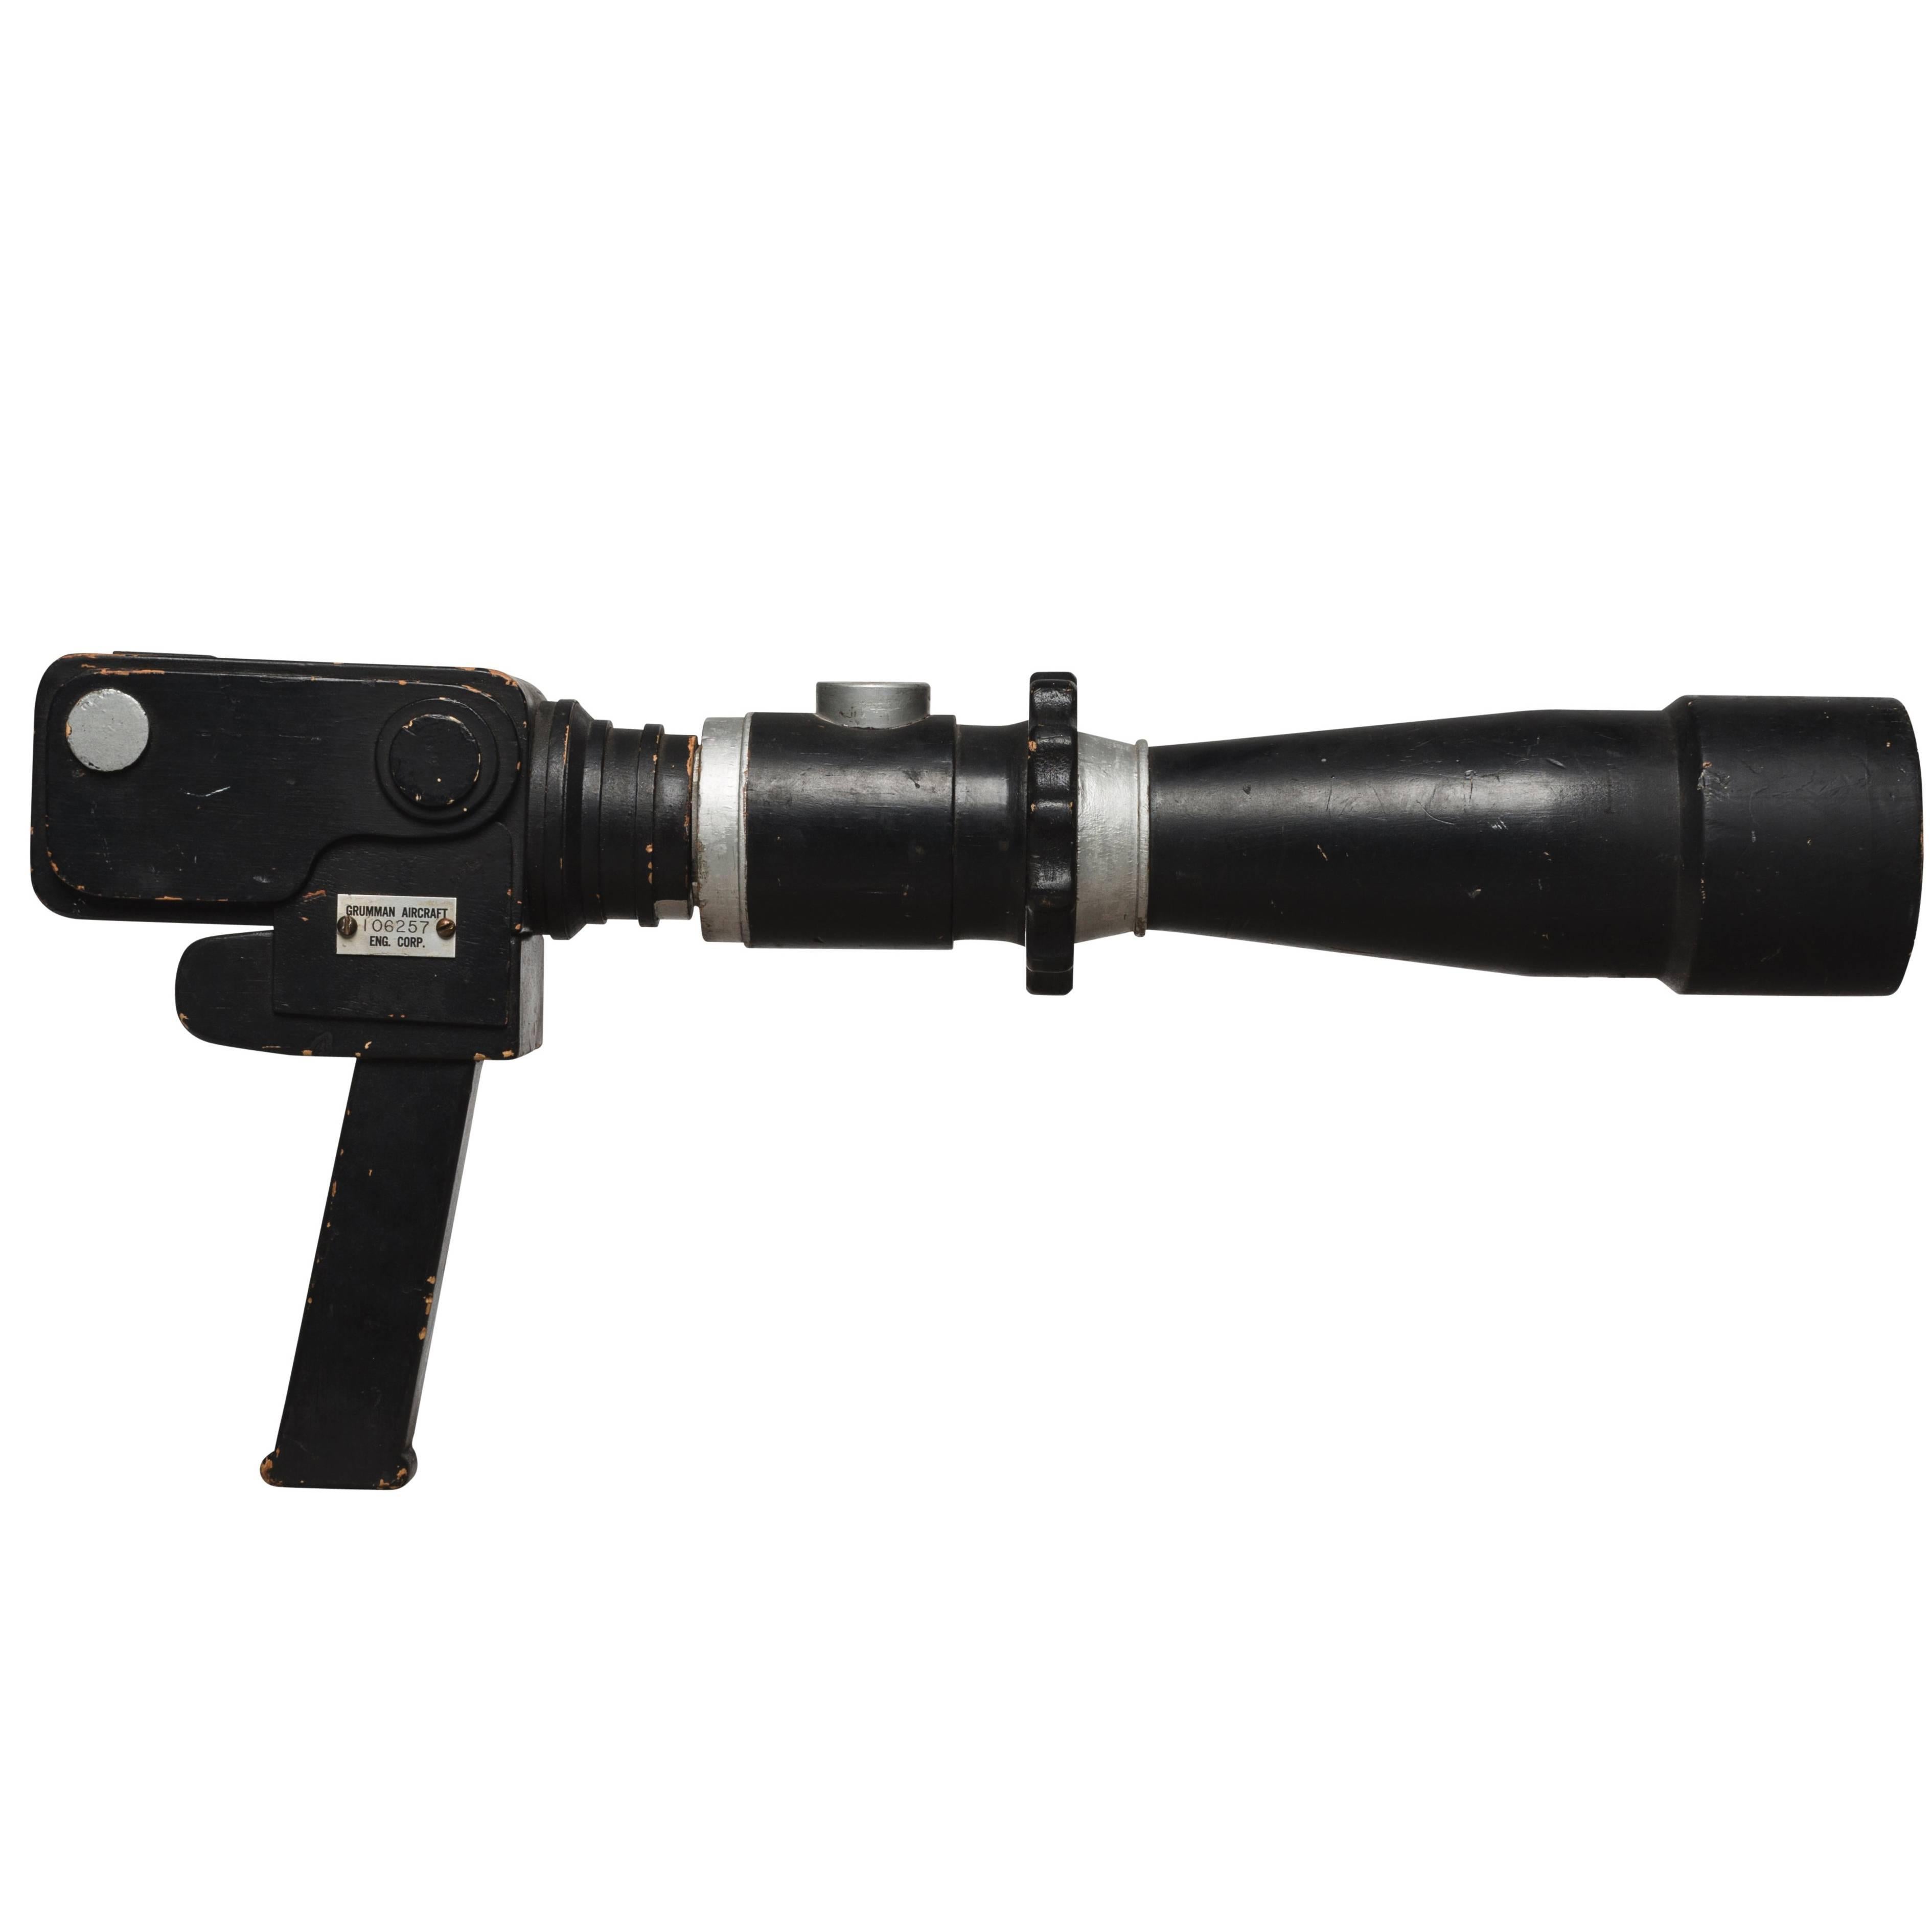 Grumman Mock-Up Hasselblad 500 with Telescopic Lense, 1960 For Sale